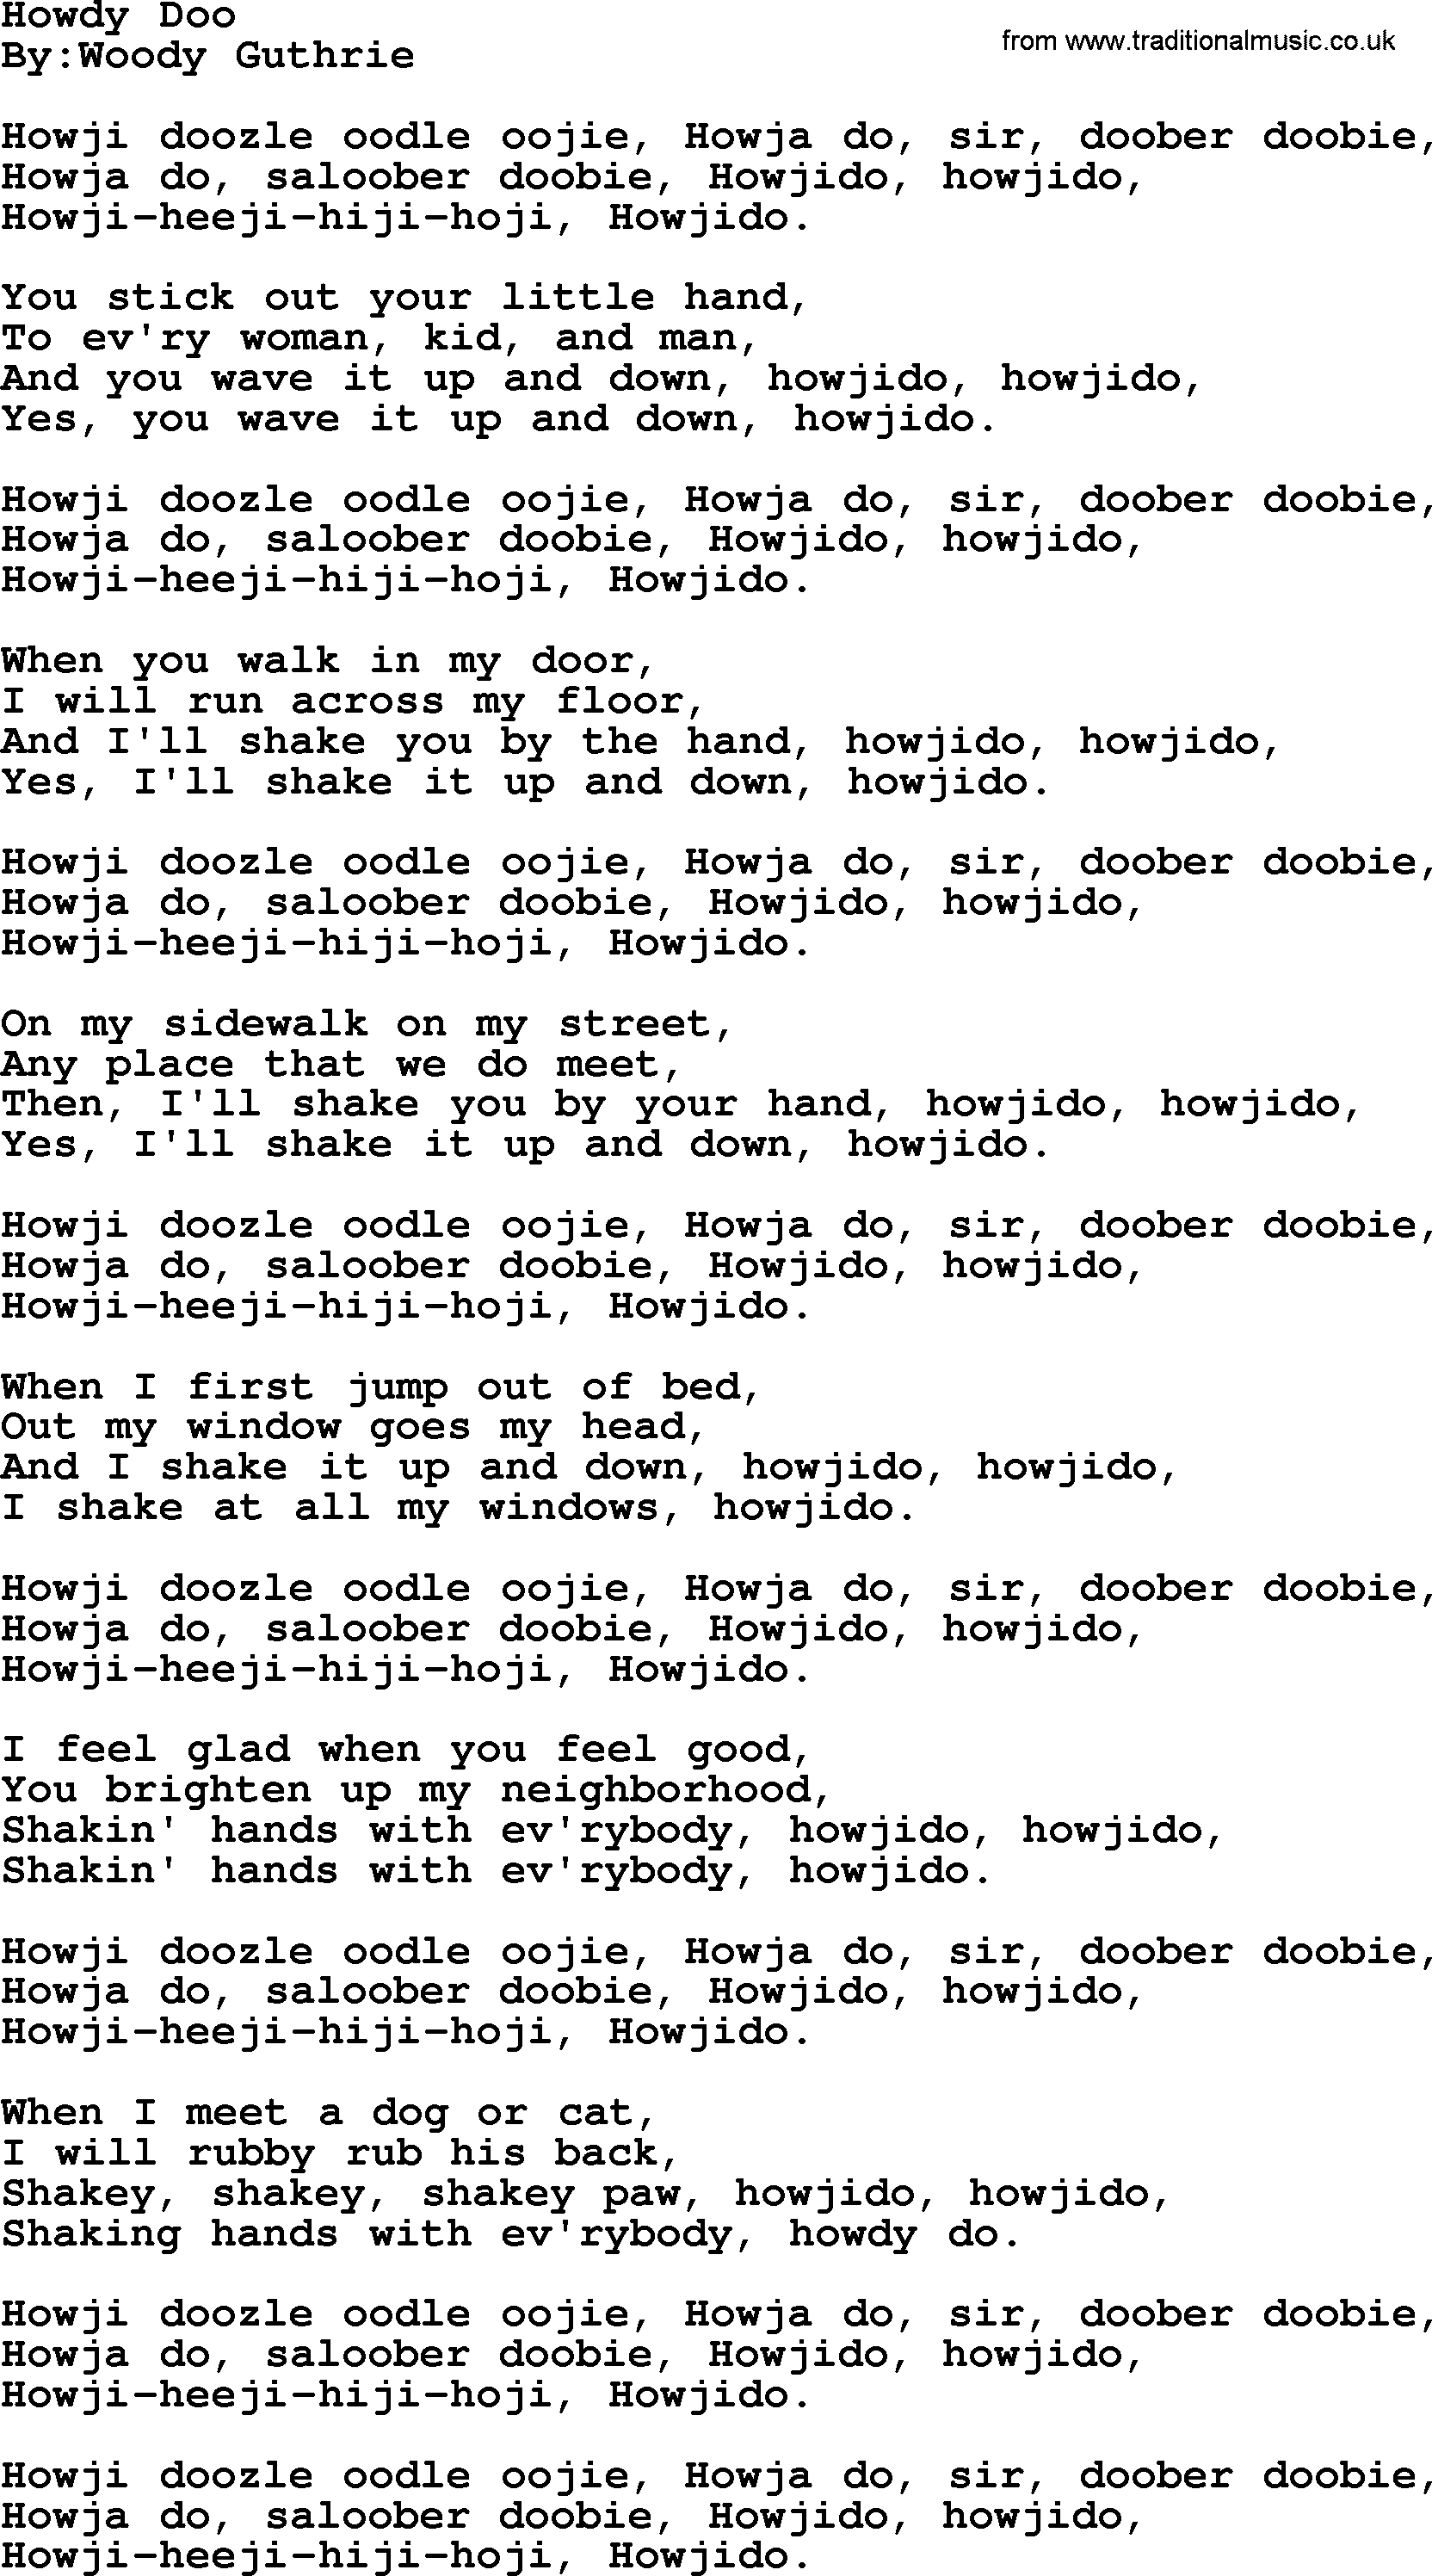 Political, Solidarity, Workers or Union song: Howdy Doo, lyrics